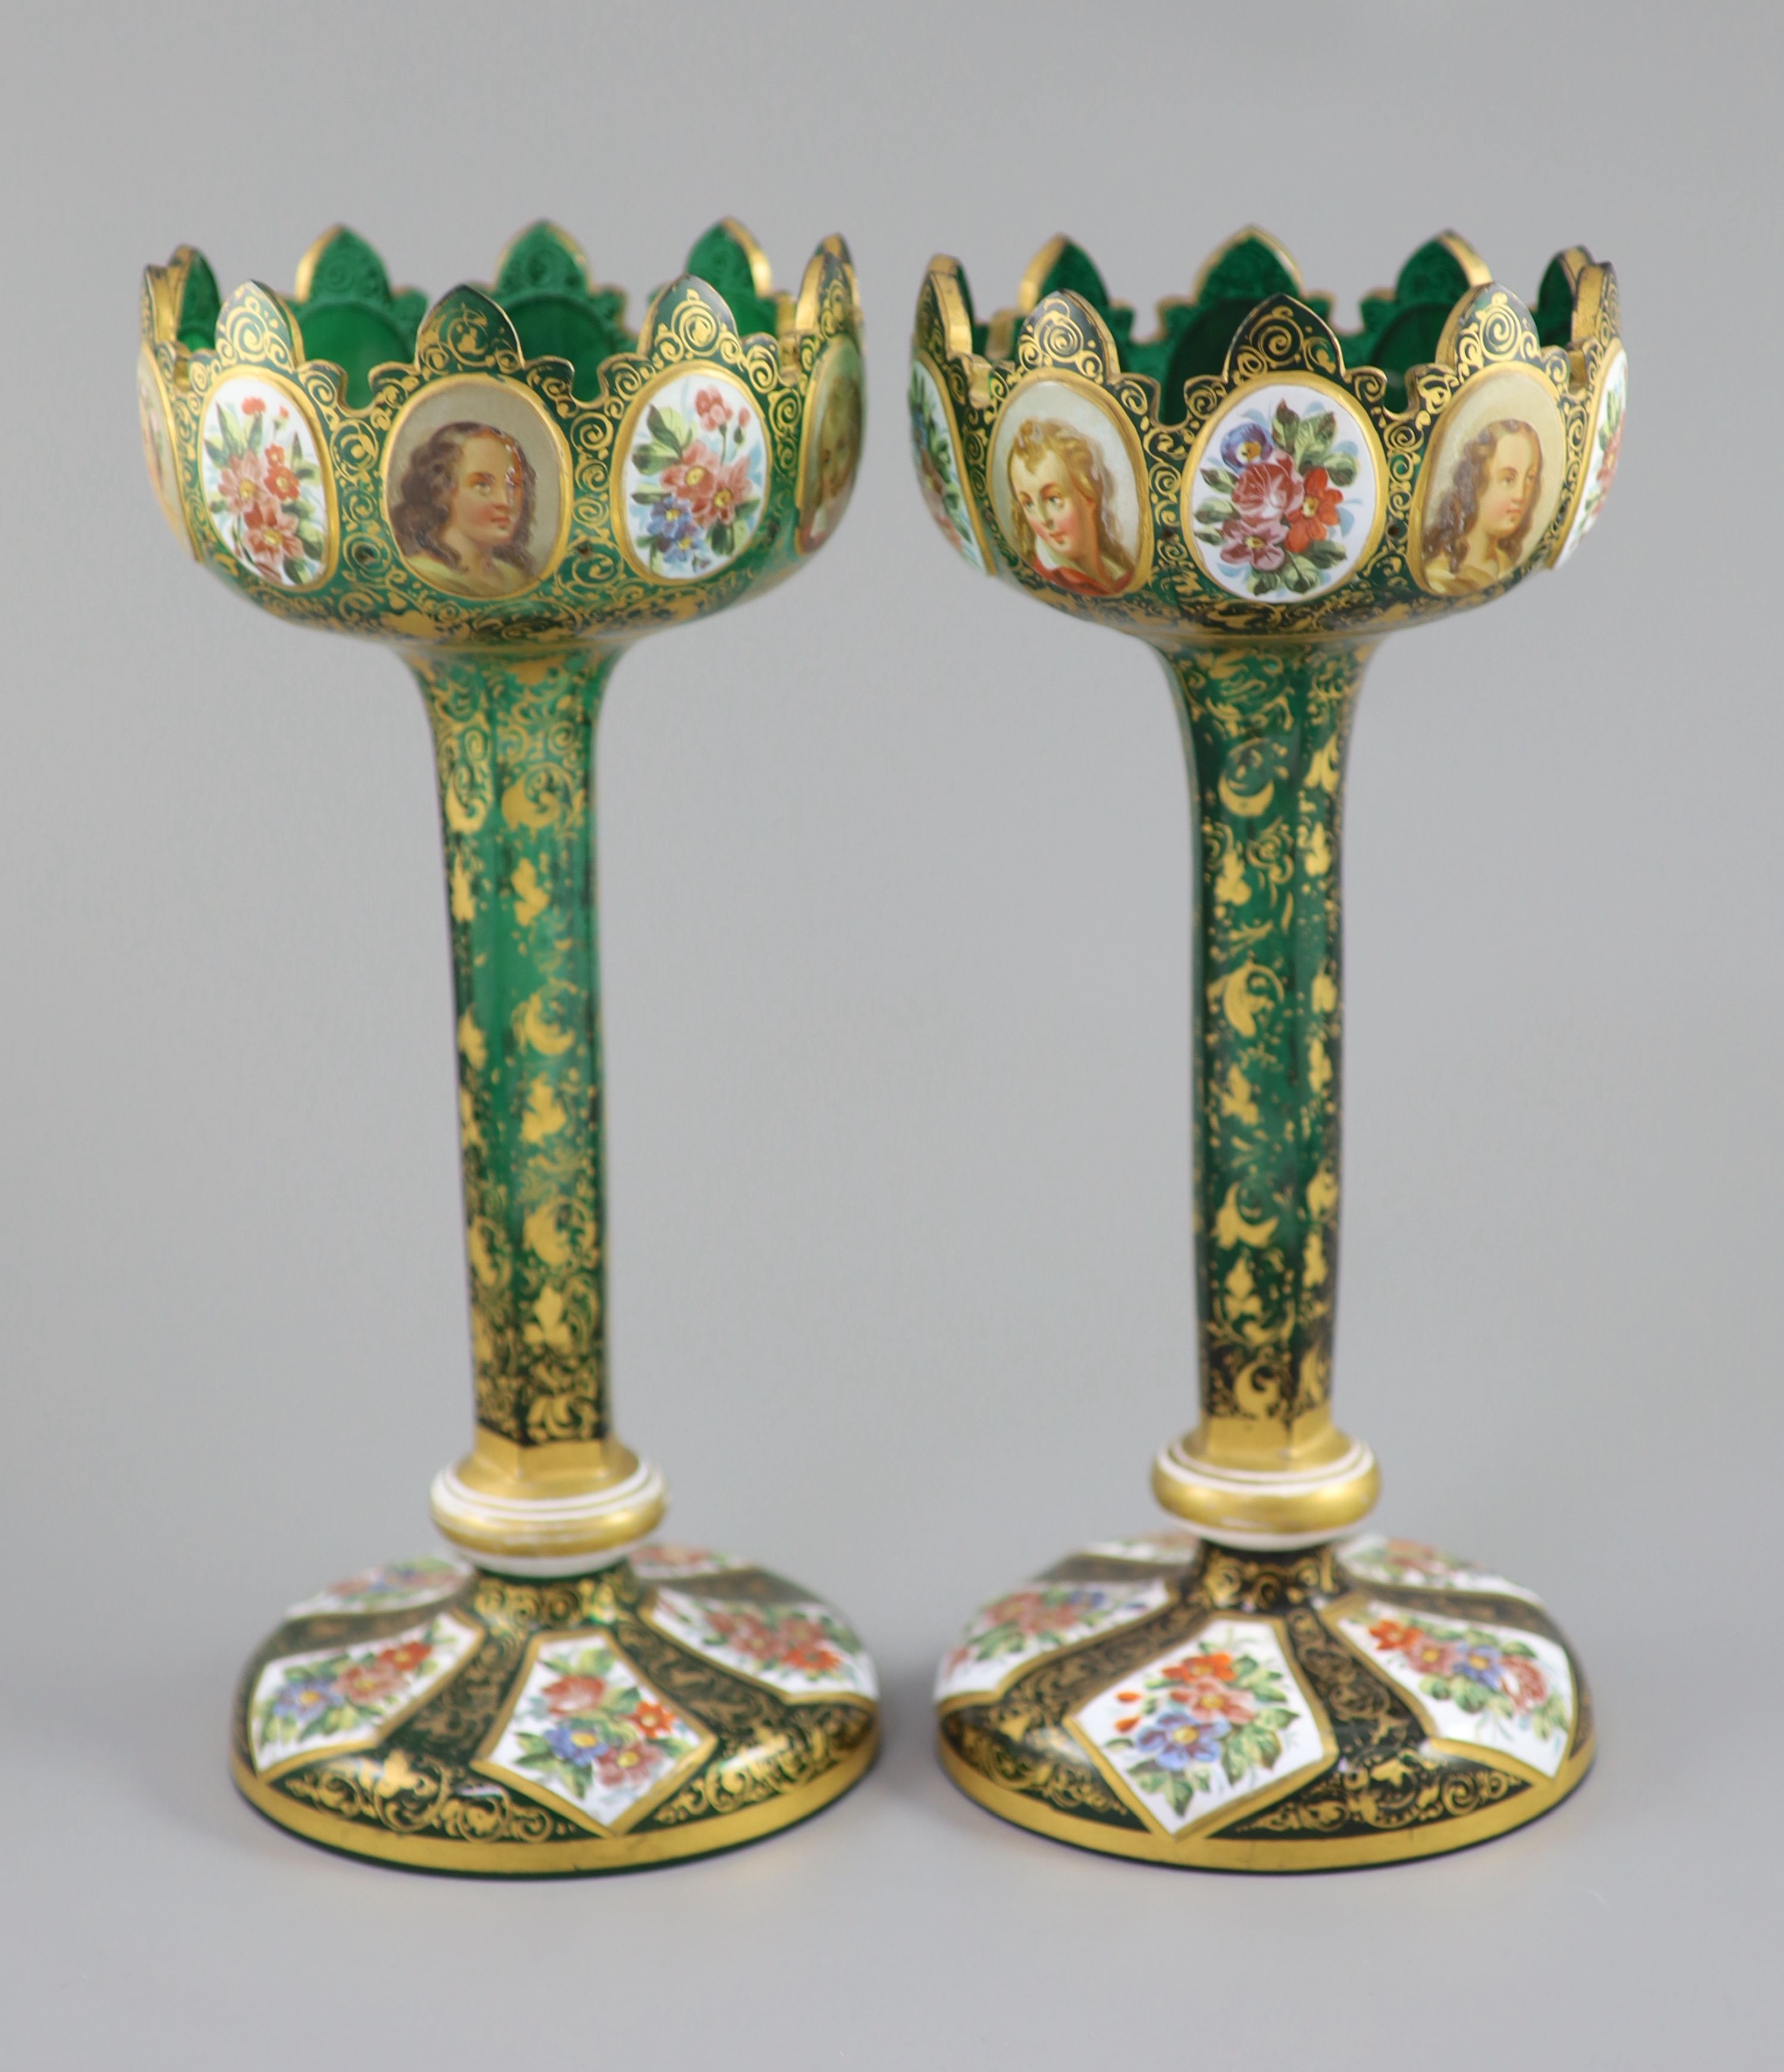 A pair of Bohemian enamelled white overlaid green glass vases, late 19th century, 31cm high